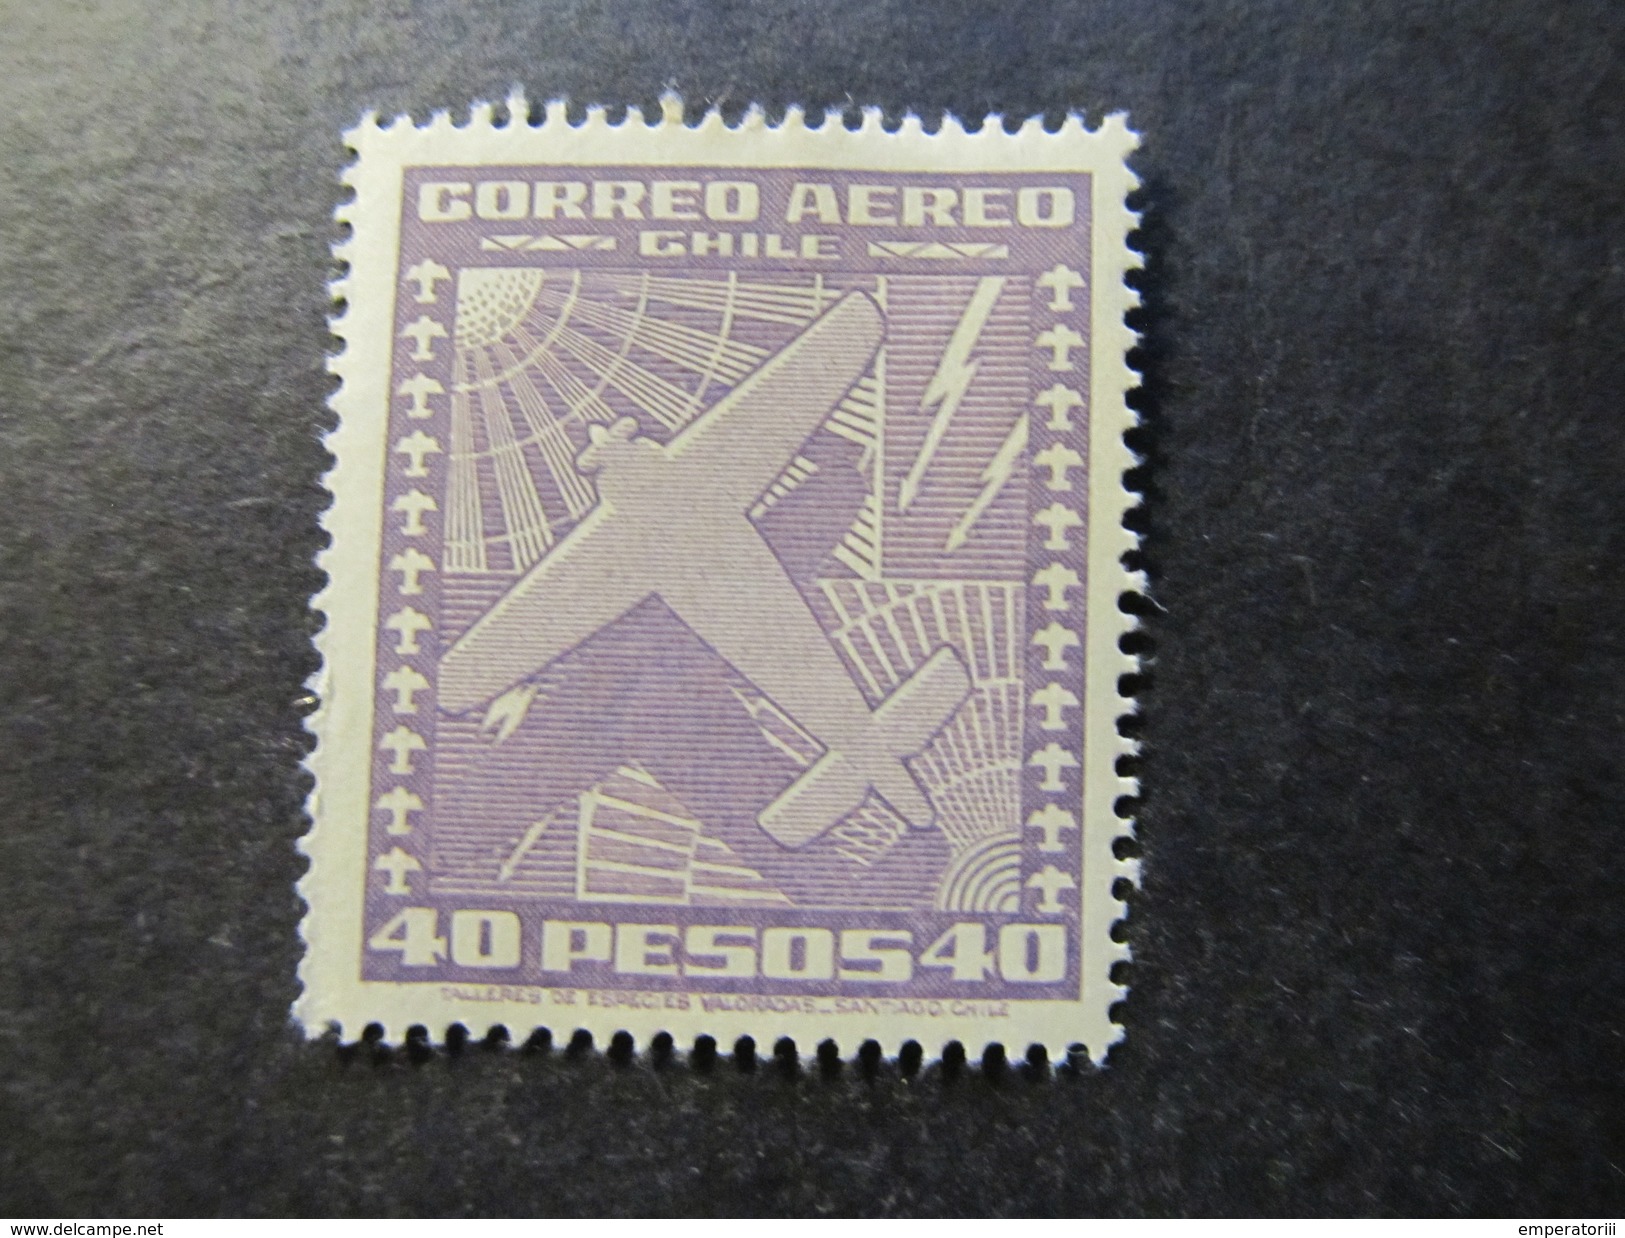 1934/39 - CHILE - AIRPLANE AND SYMBOLS OF SPACE - SCOTT C49 AP9 40P - Chile